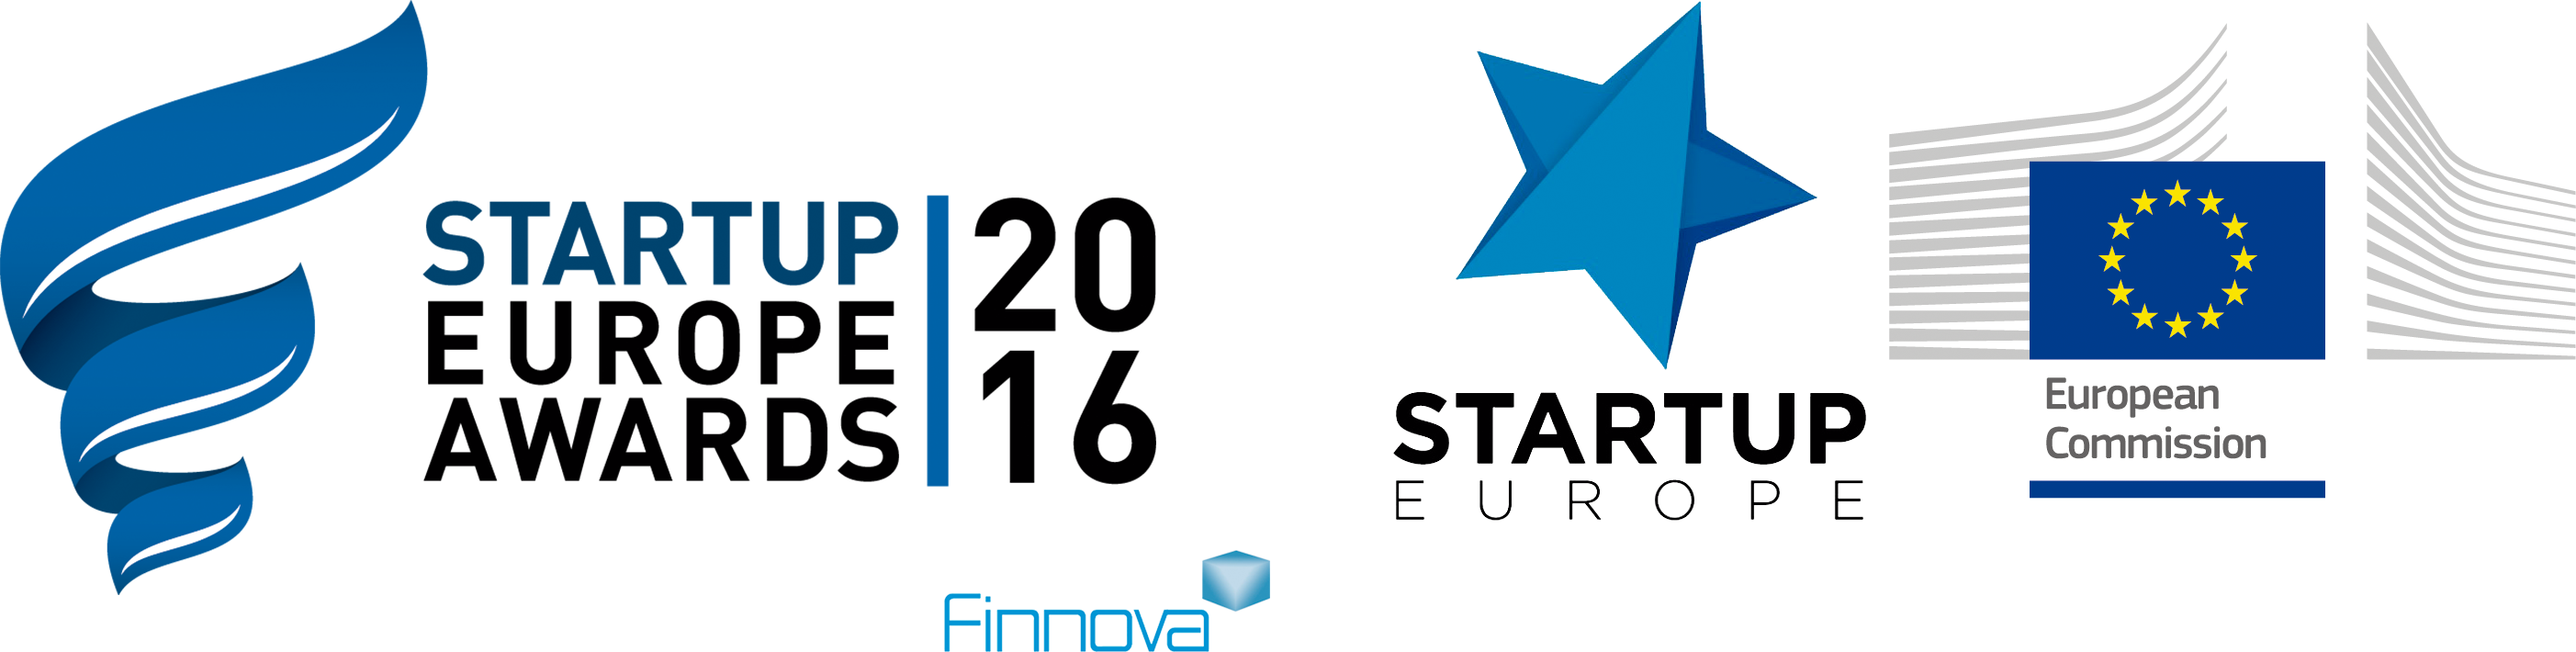 Welcome to StartUp Europe Awards!